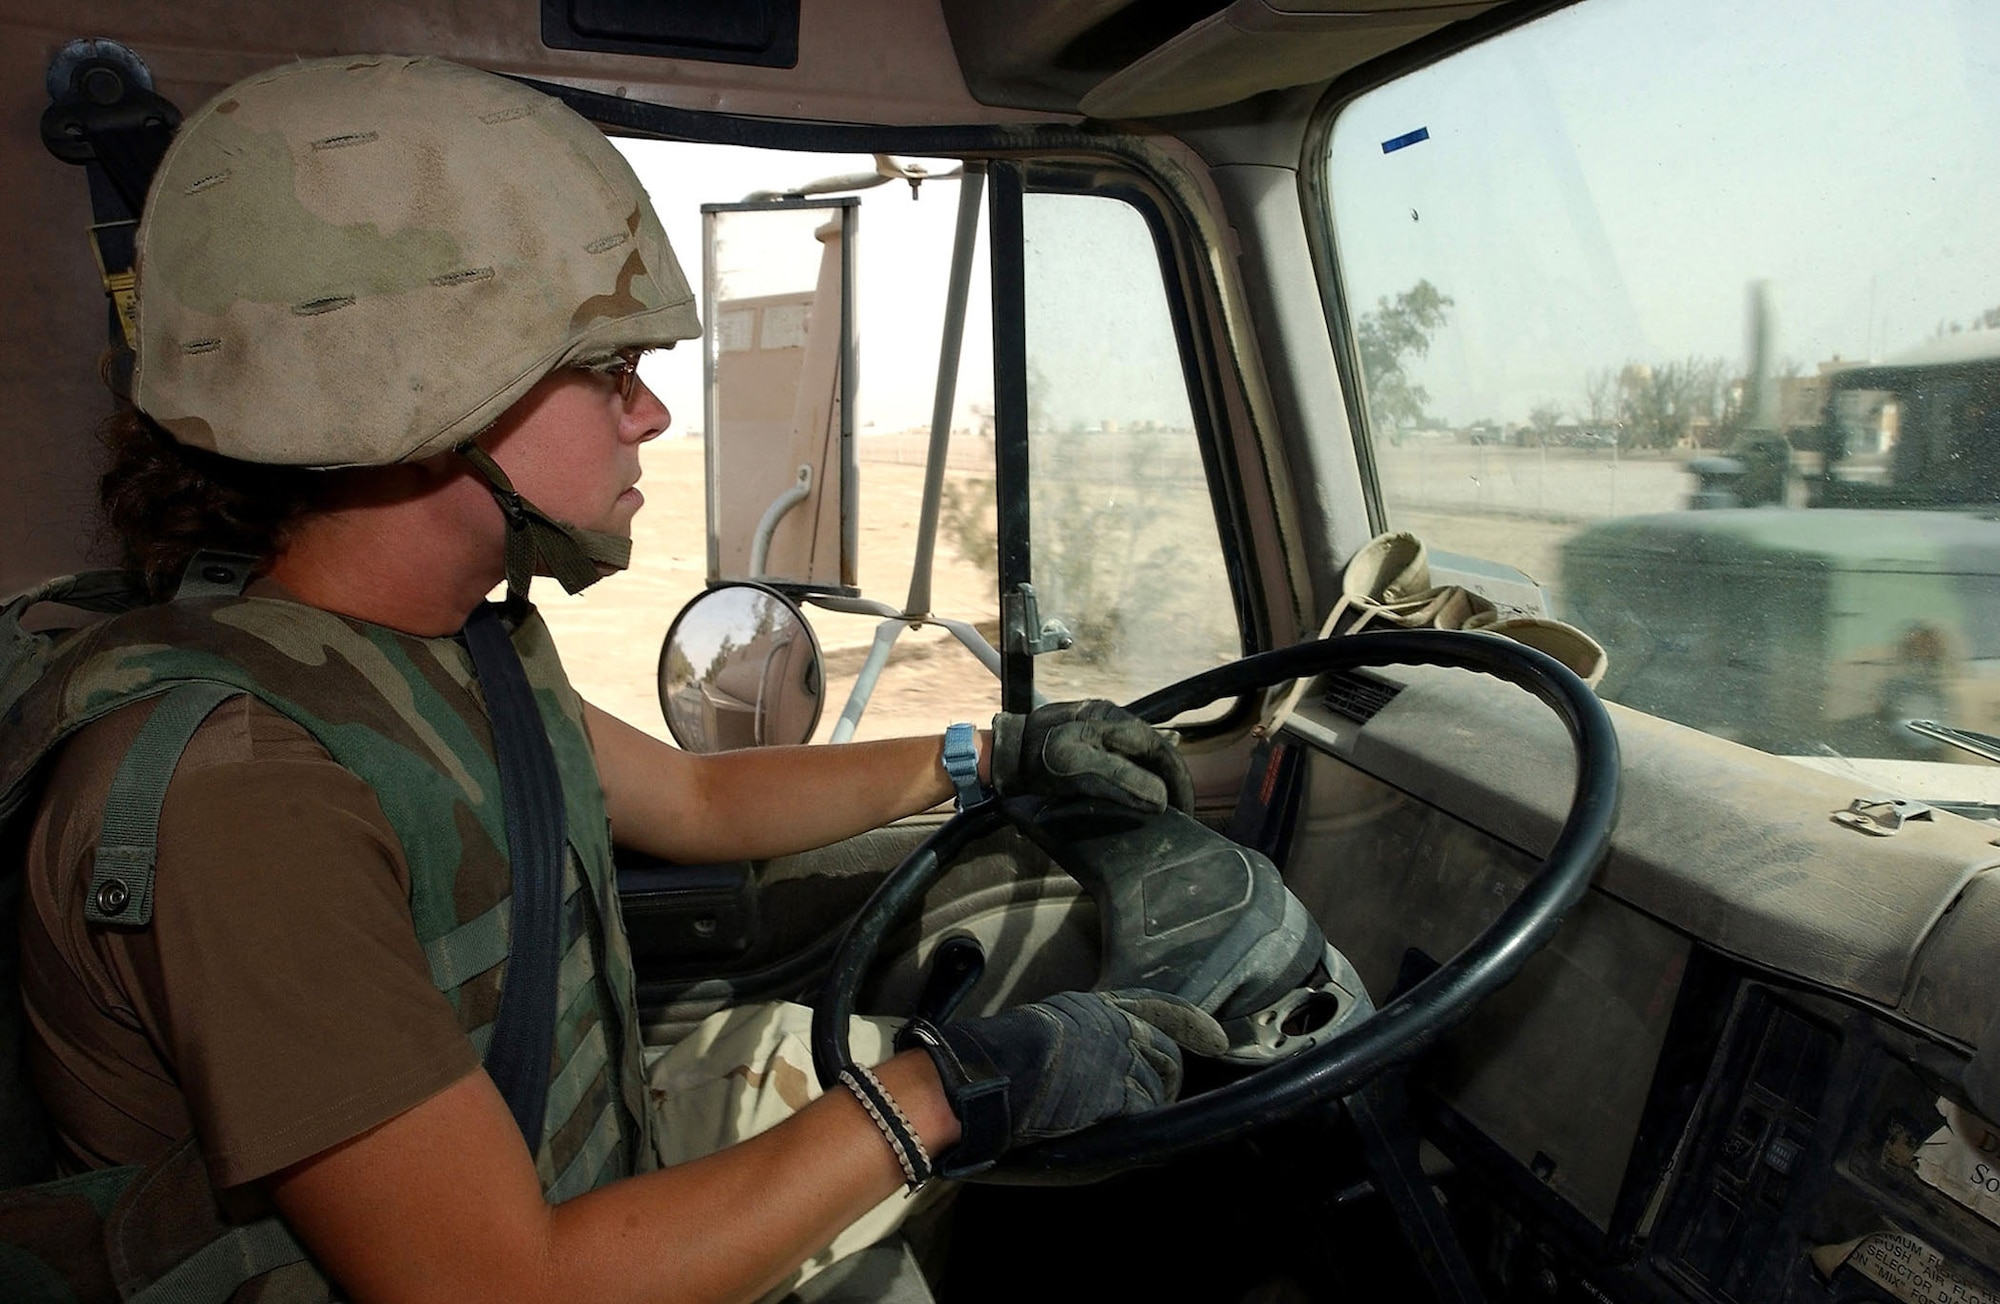 ALI BASE, Iraq -- Airman 1st Class Sarah Stewart drives a diesel truck to provide fuel to more than 40 U.S. servicemembers and coalition customers daily here. The installation is powered by fuel versus electricity, and without it Airmen would not have any of the necessities taken for granted here. Airman Stewart is a fuels specialist with the 407th Expeditionary Logistics Readiness Squadron and is deployed from McConnell Air Force Base, Kan.  (U.S. Air Force photo by Master Sgt. Maurice Hessel)